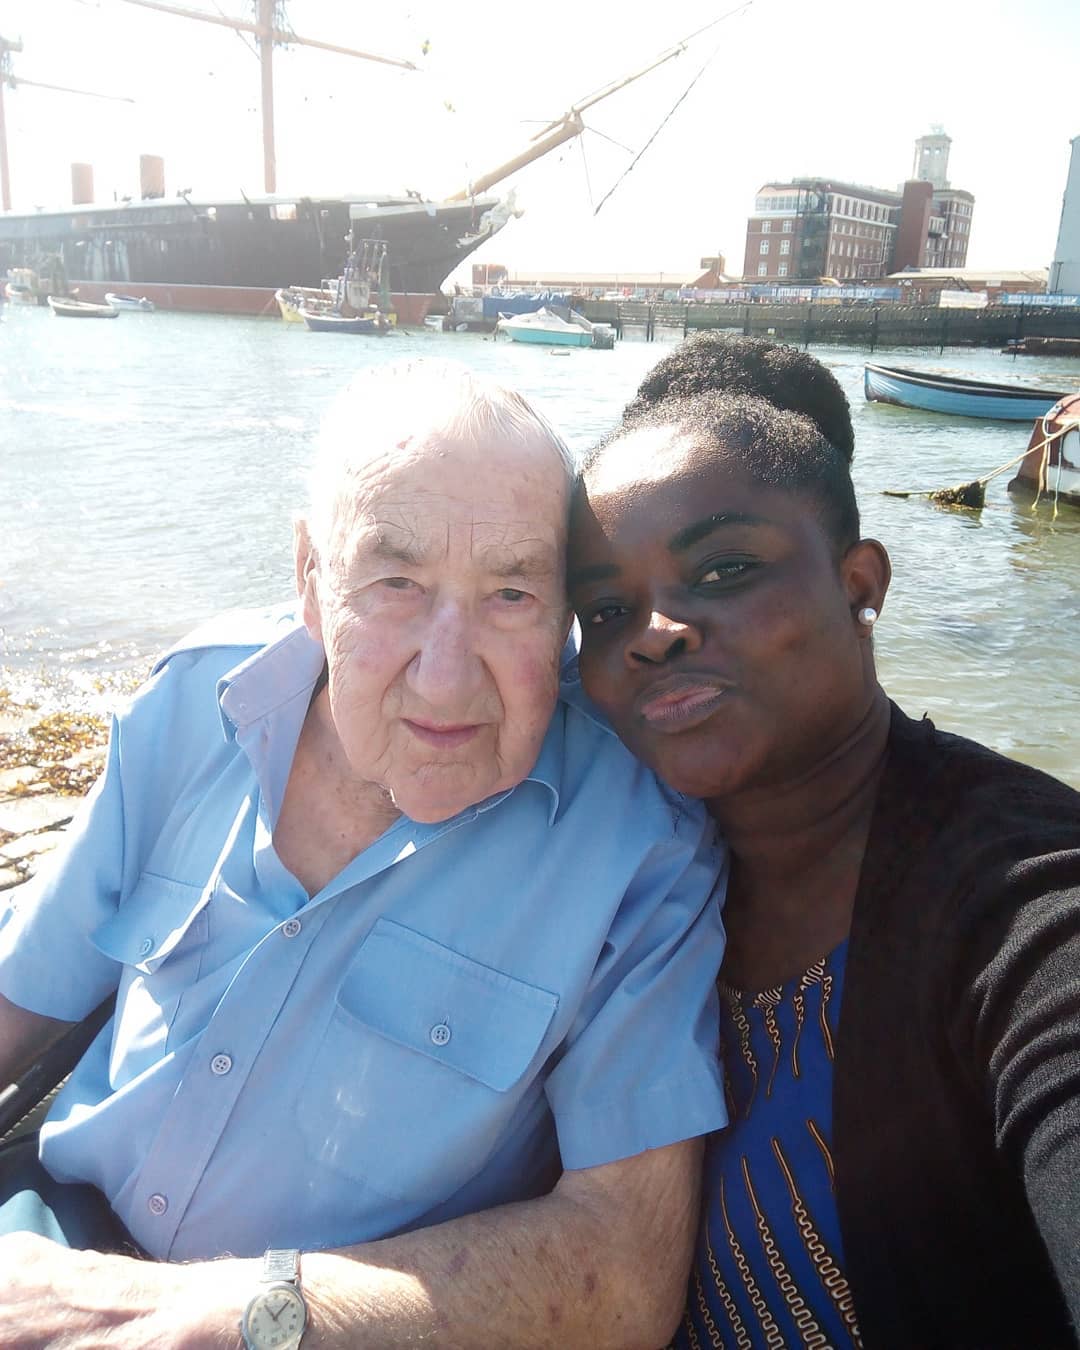 'I met my husband through Yahoo Yahoo' - Lady who is married to a 90-year-old white man discloses how she met him